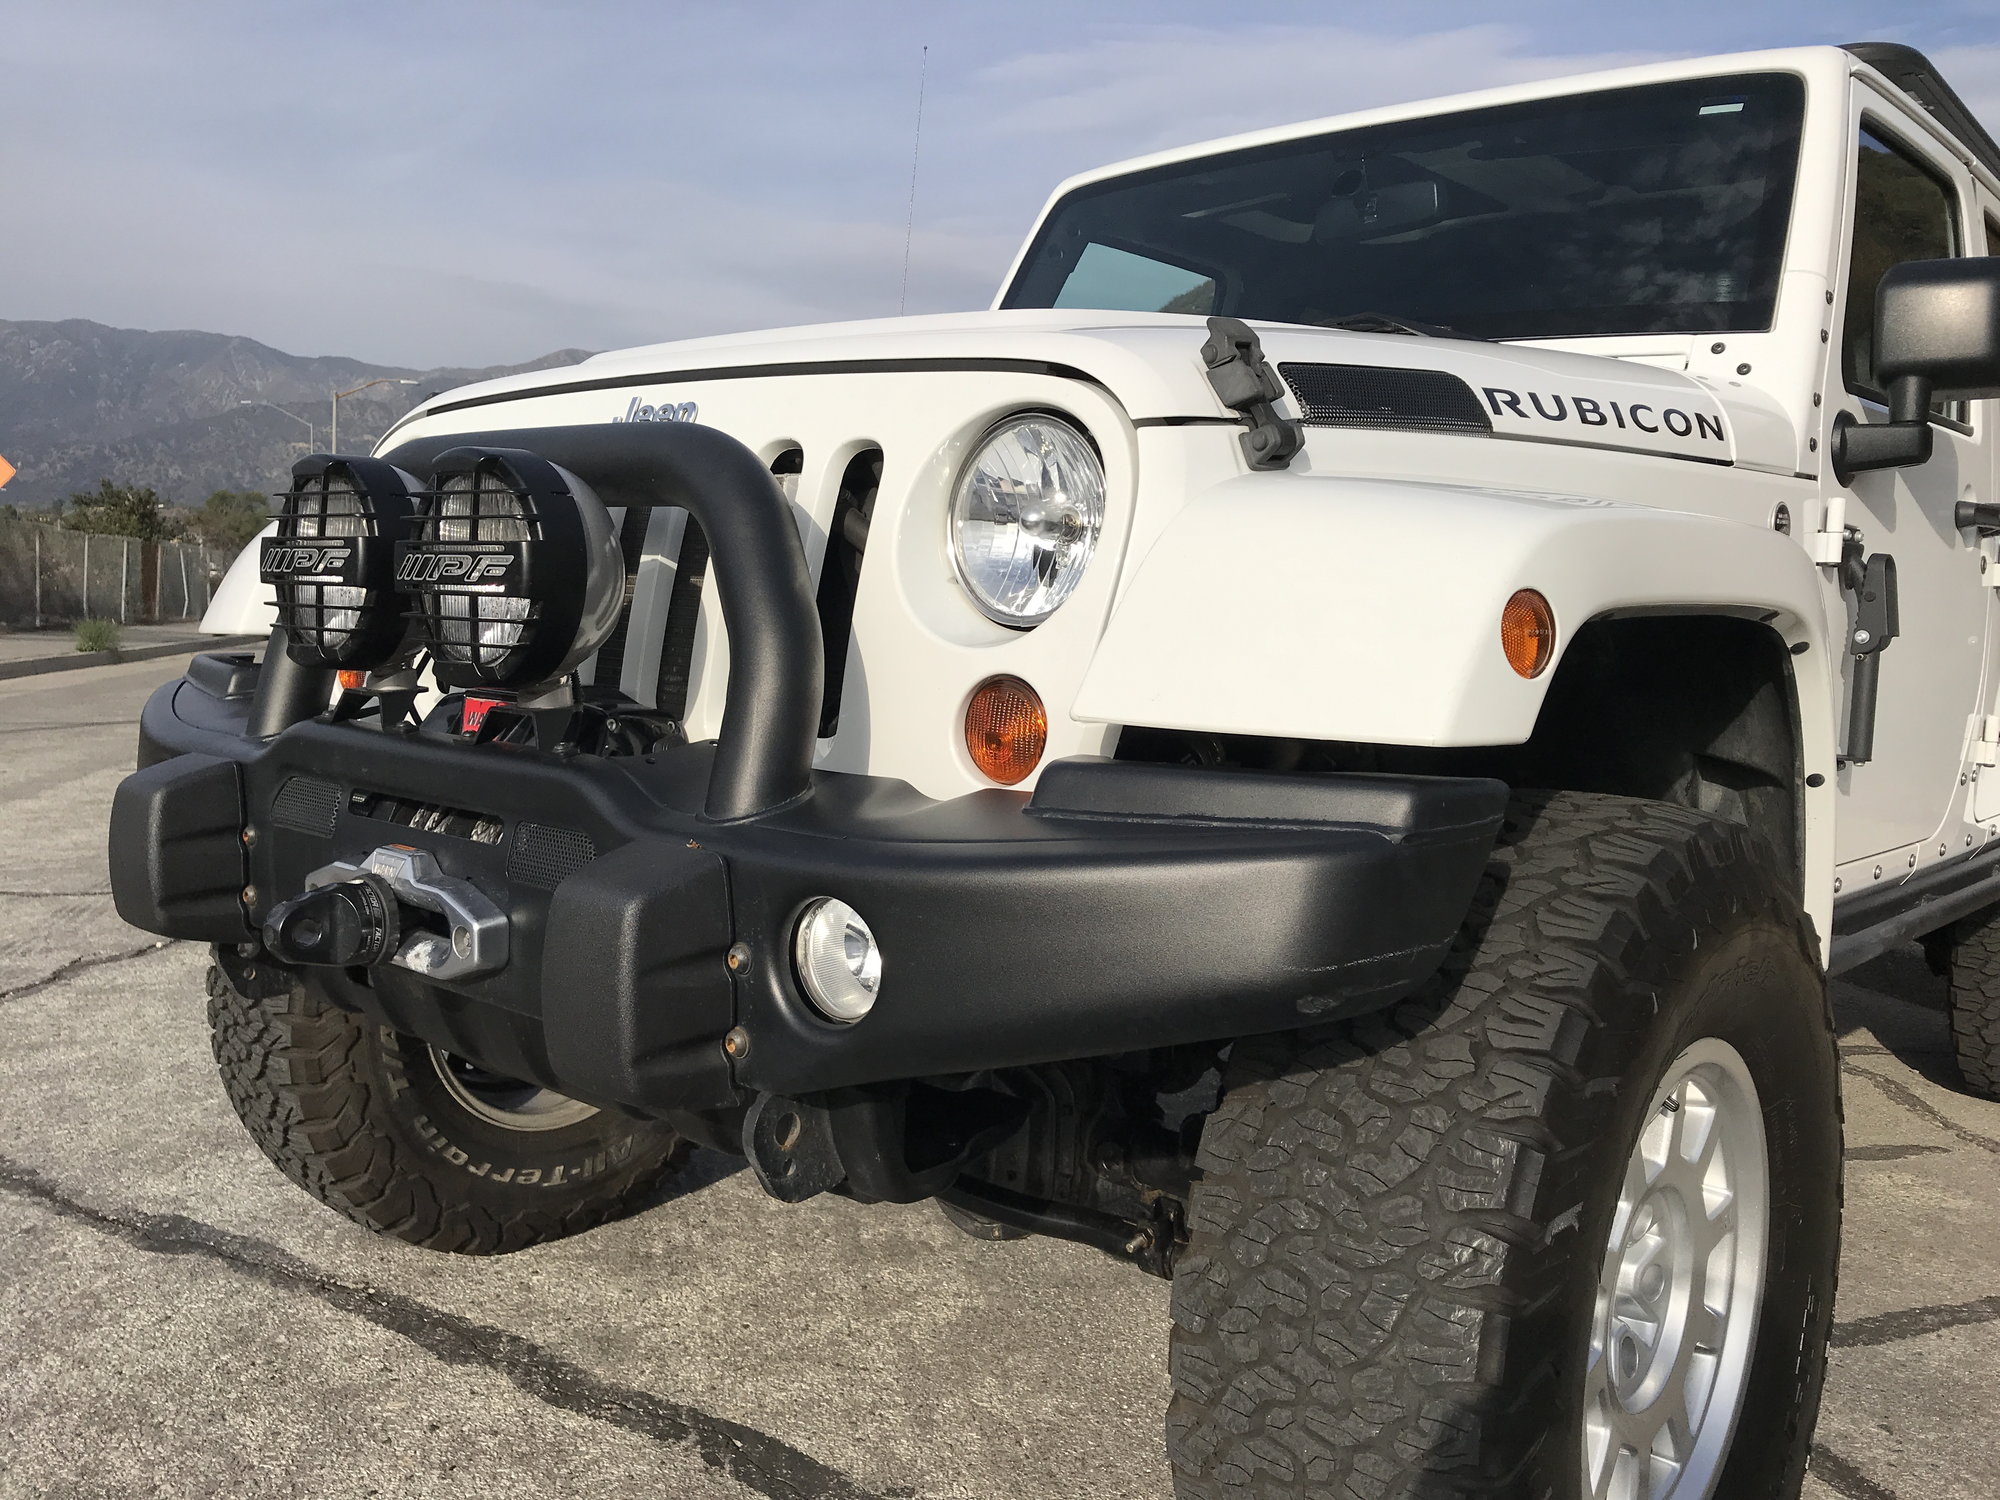 2013 Jeep Wrangler - '13 Jeep Wrangler JK Rubicon, 6-Speed, Supercharged, Lifted, 25k mi, SoCal - Used - VIN 1C4BJWFG6DL632664 - 25,000 Miles - 6 cyl - 4WD - Manual - SUV - White - Glendale, CA 91207, United States